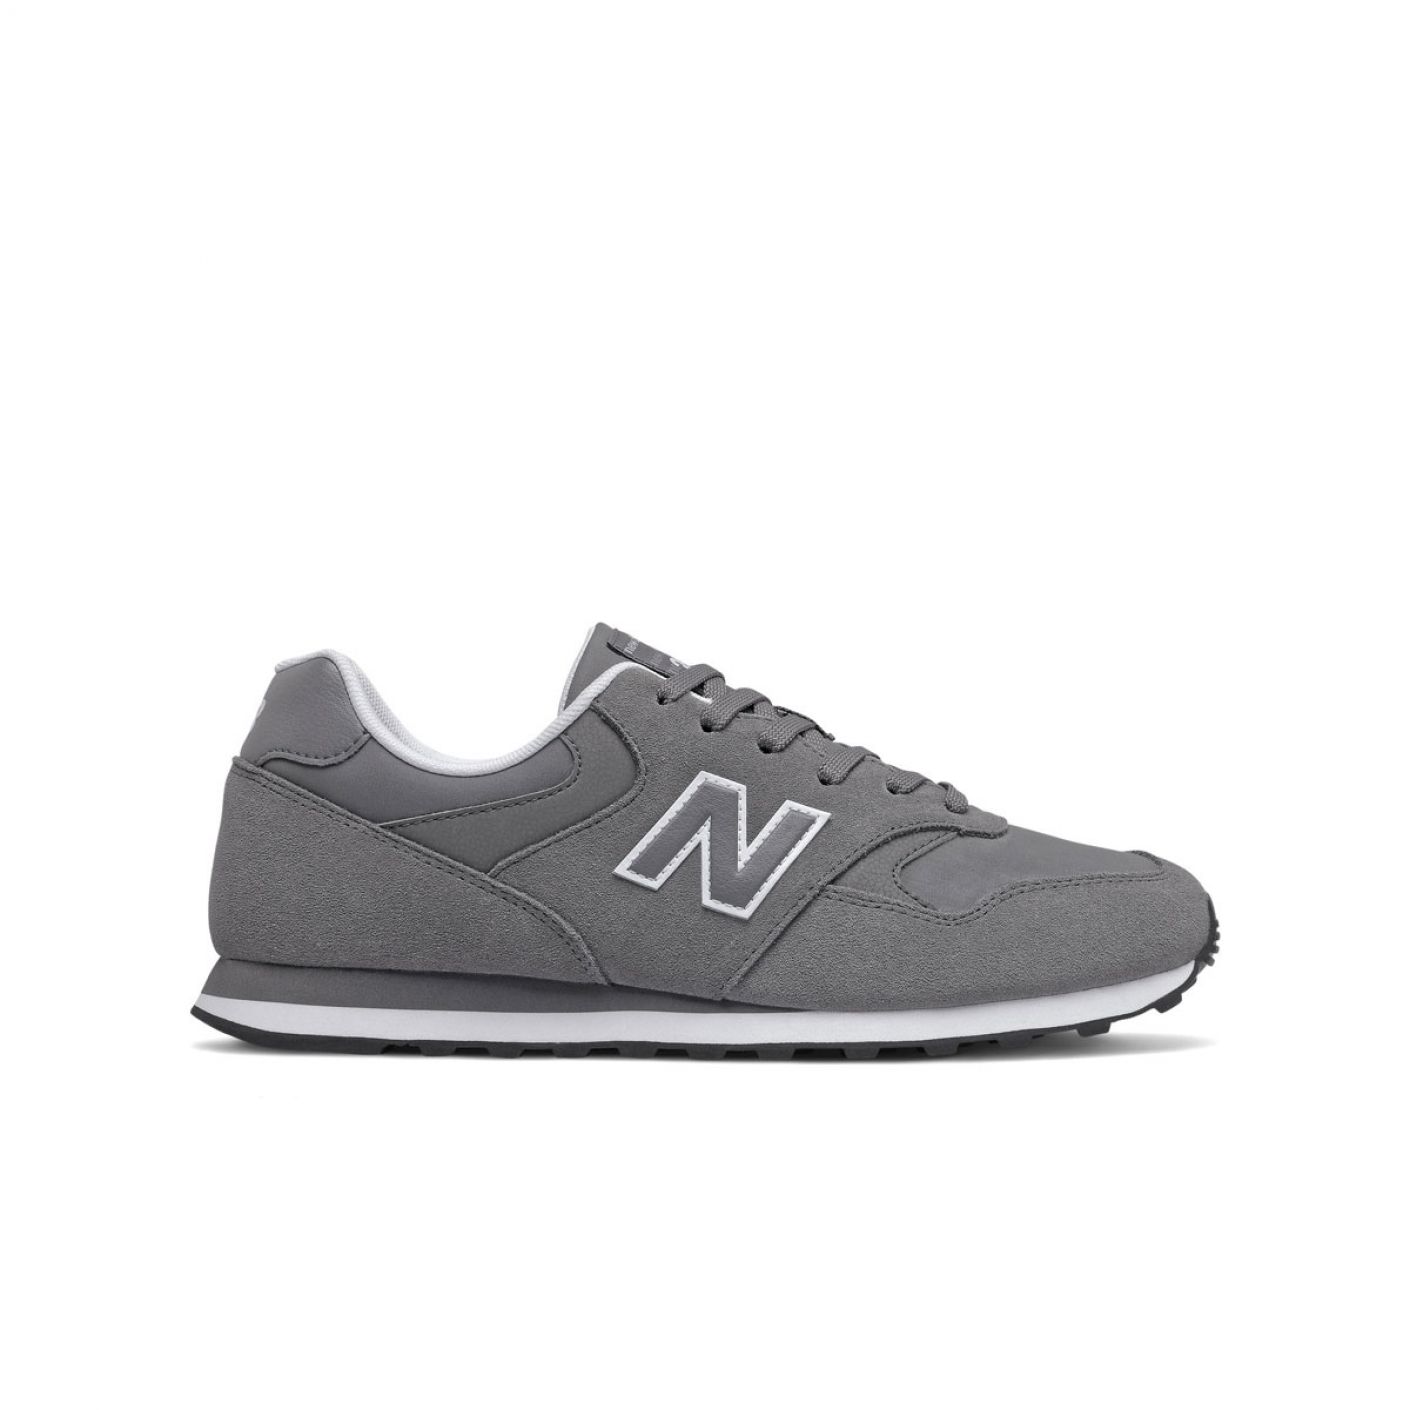 New Balance 393 Suede Castlerock with Gray